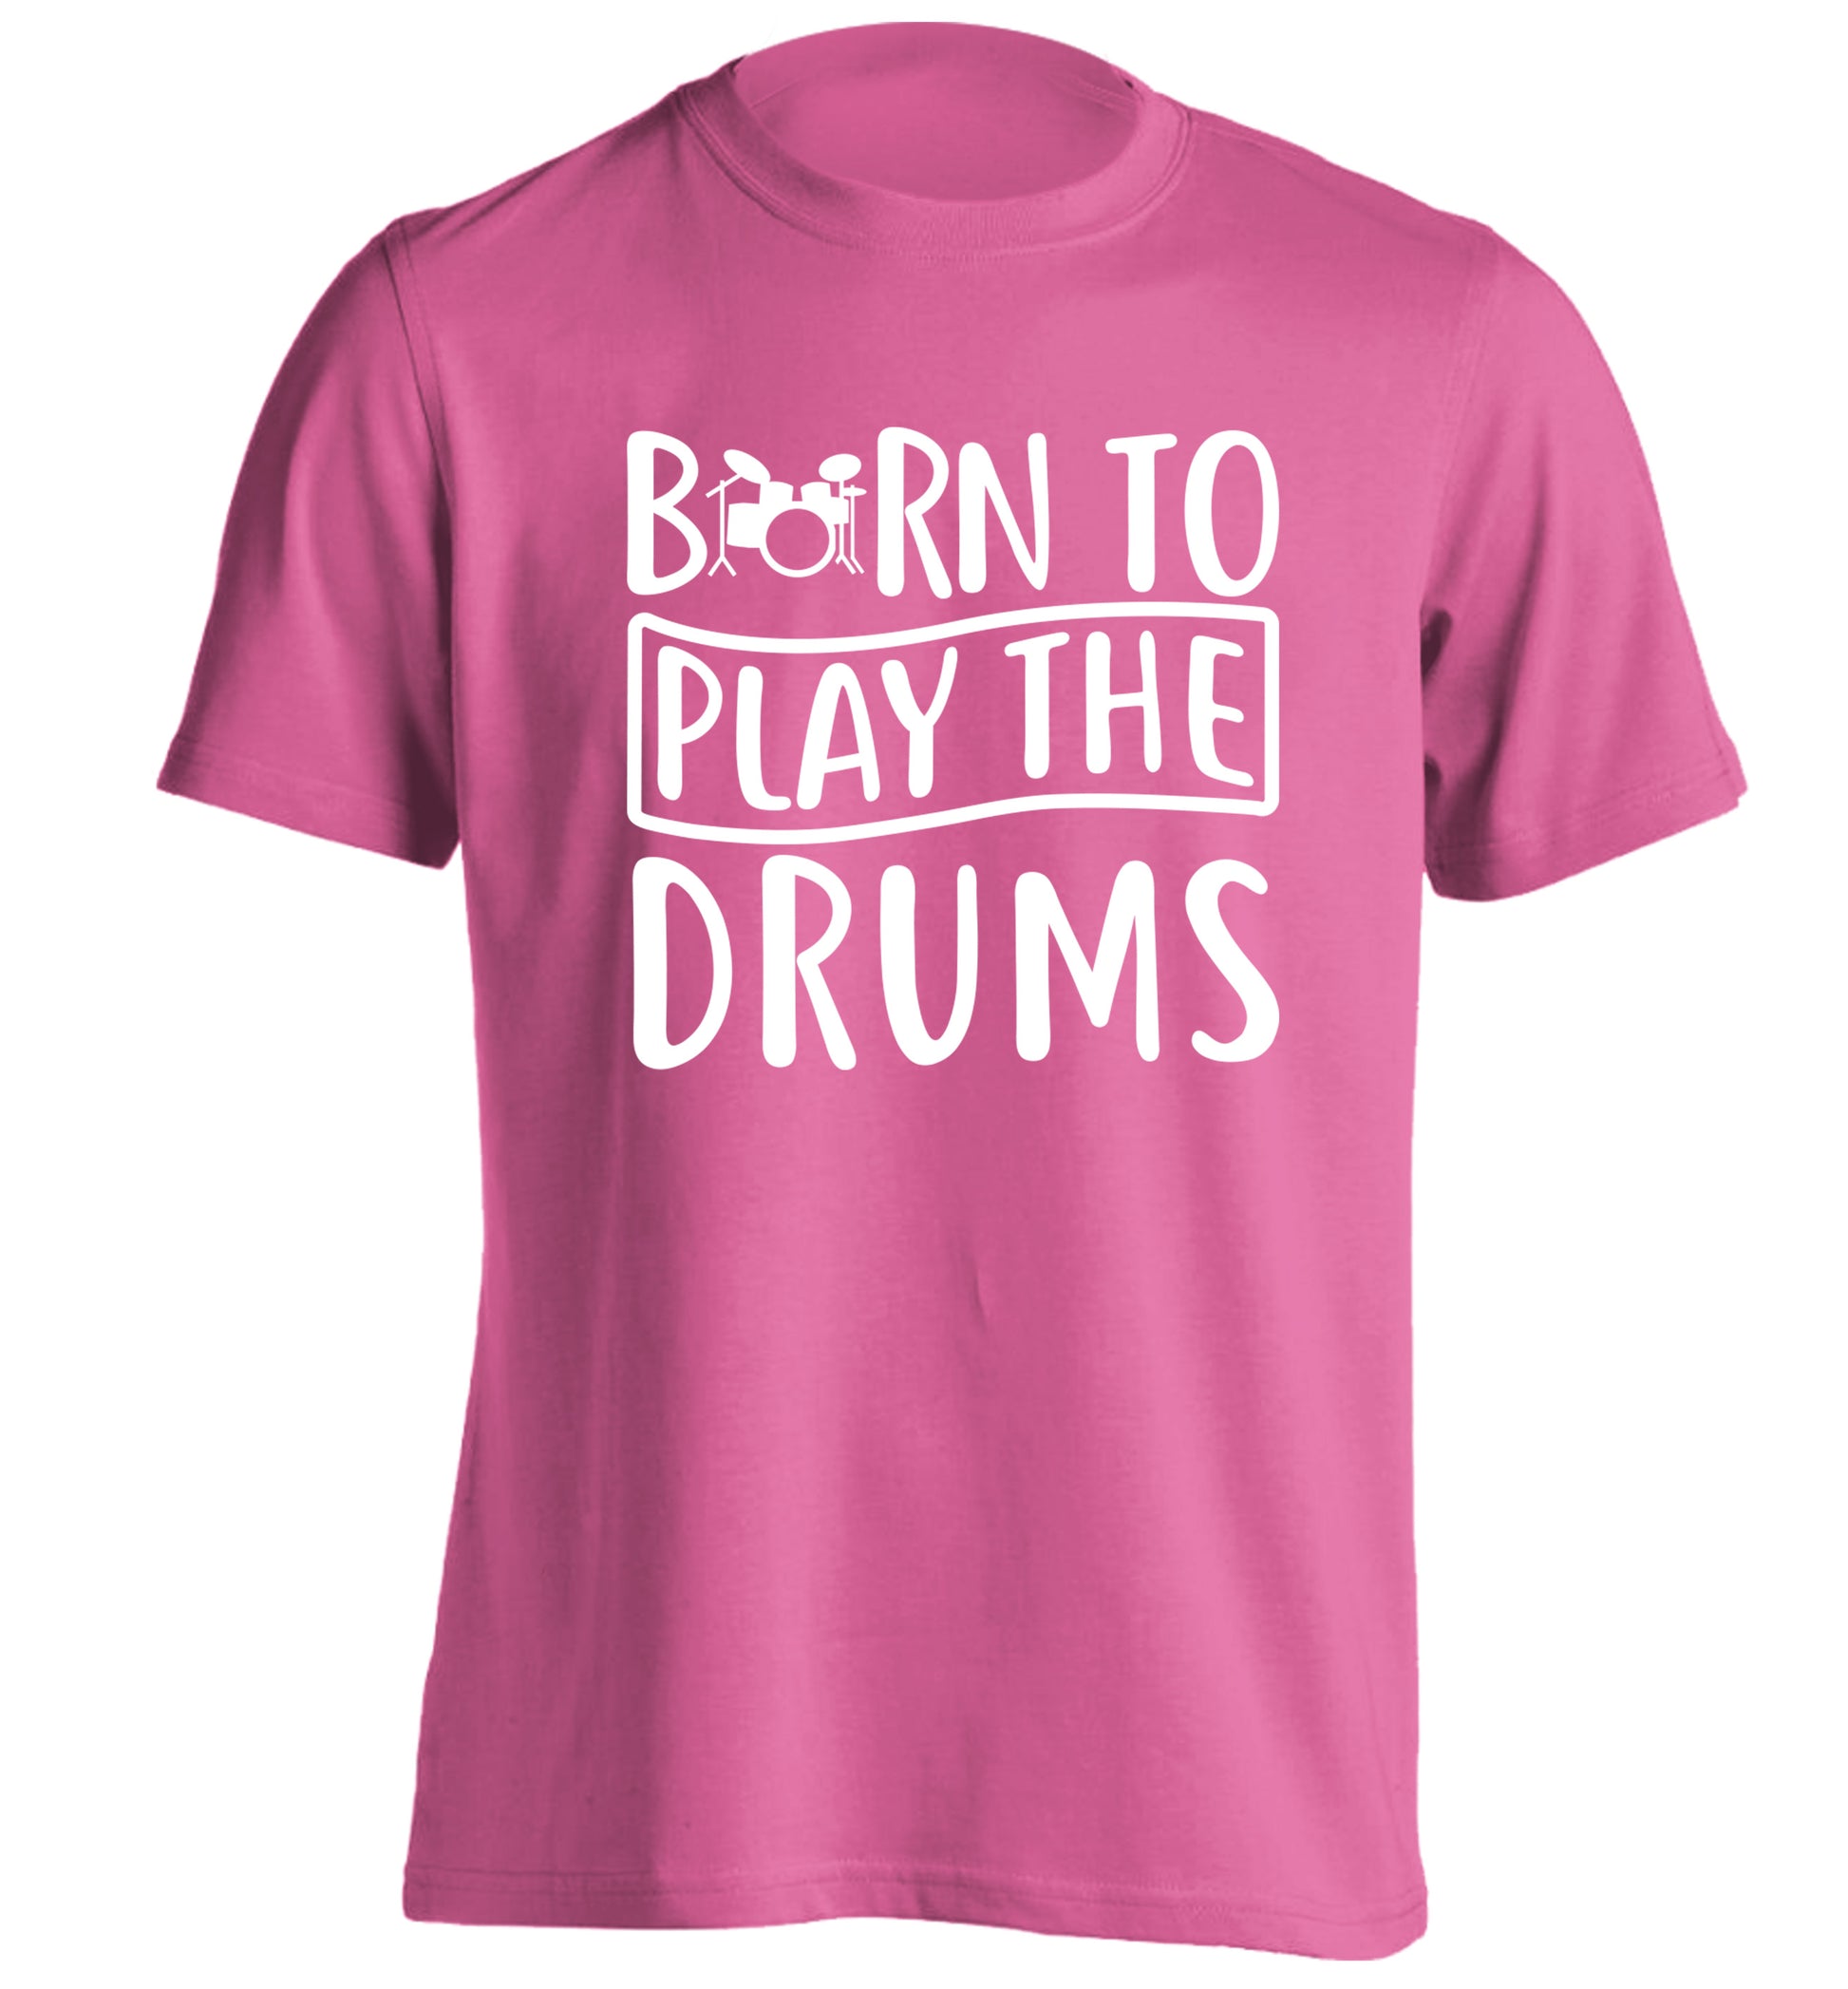 Born to play the drums adults unisex pink Tshirt 2XL